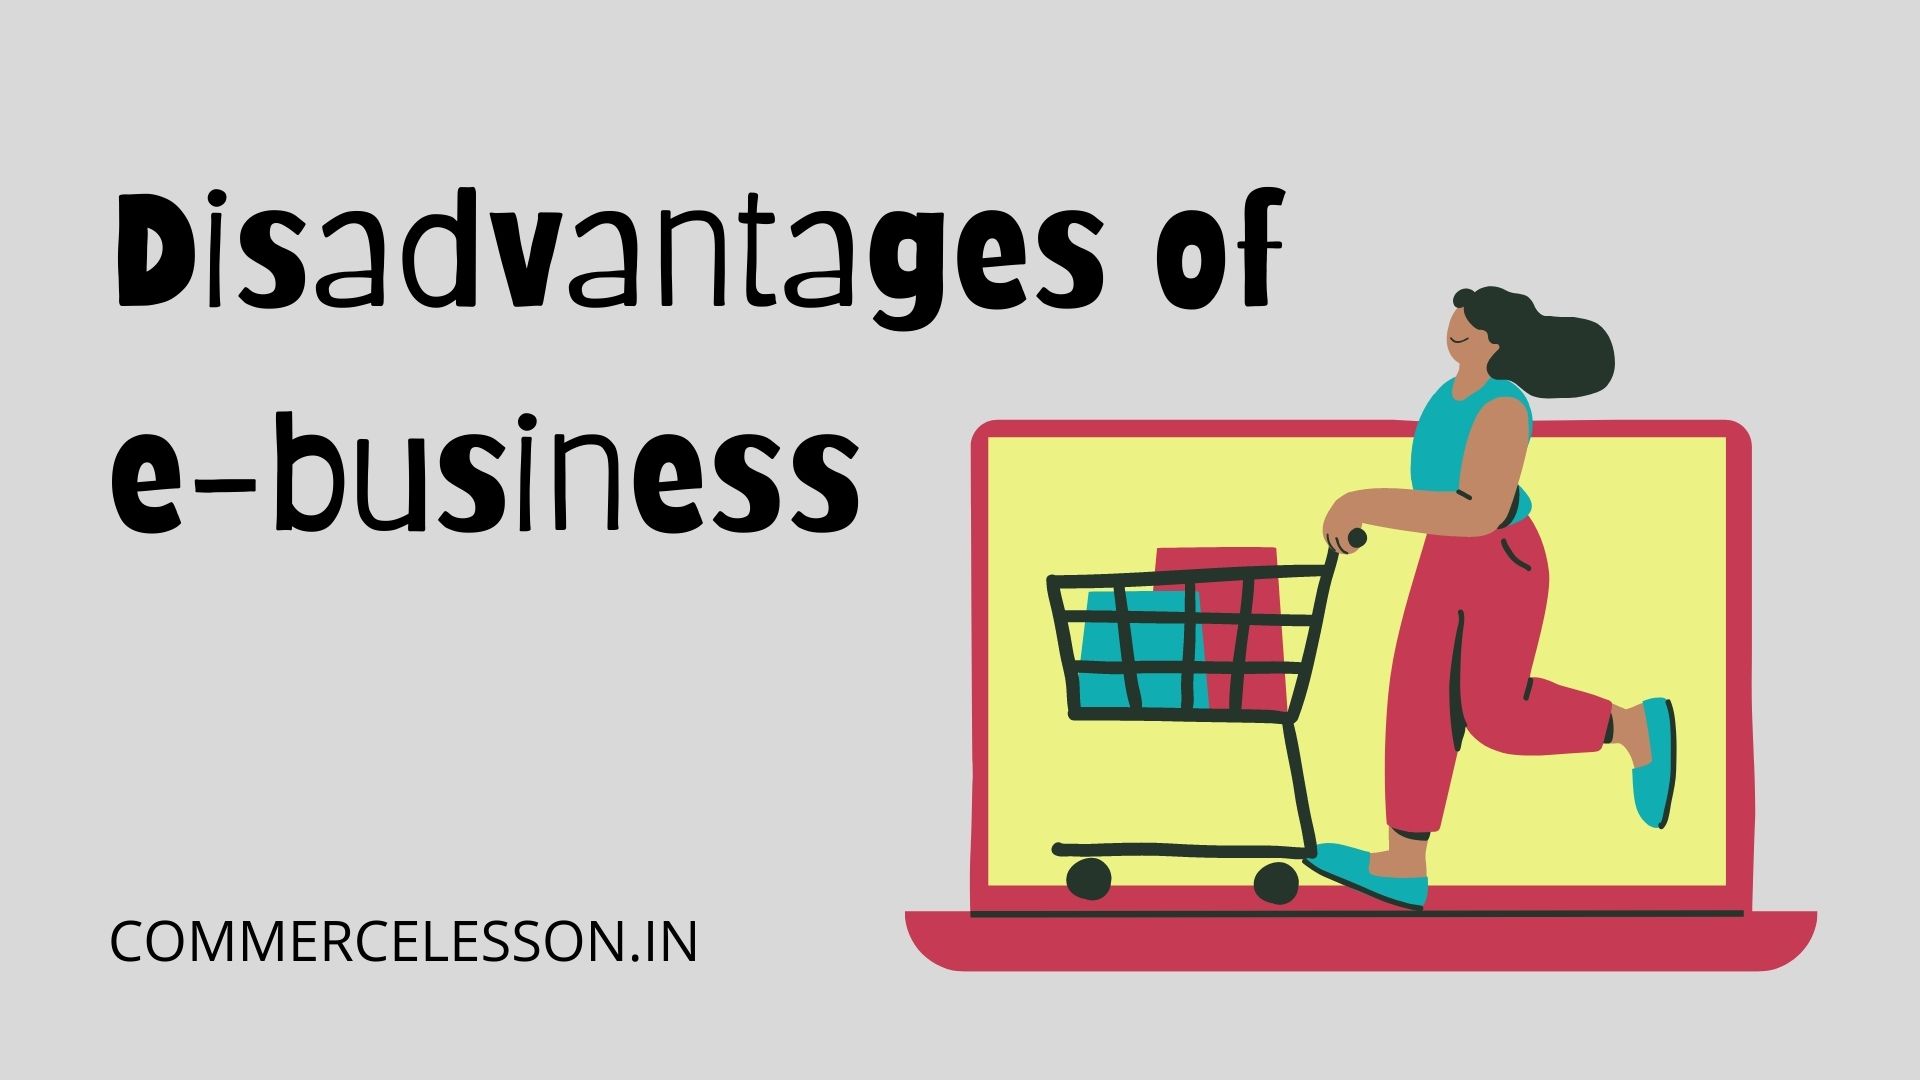 Disadvantages of e-business - CommerceLesson.in